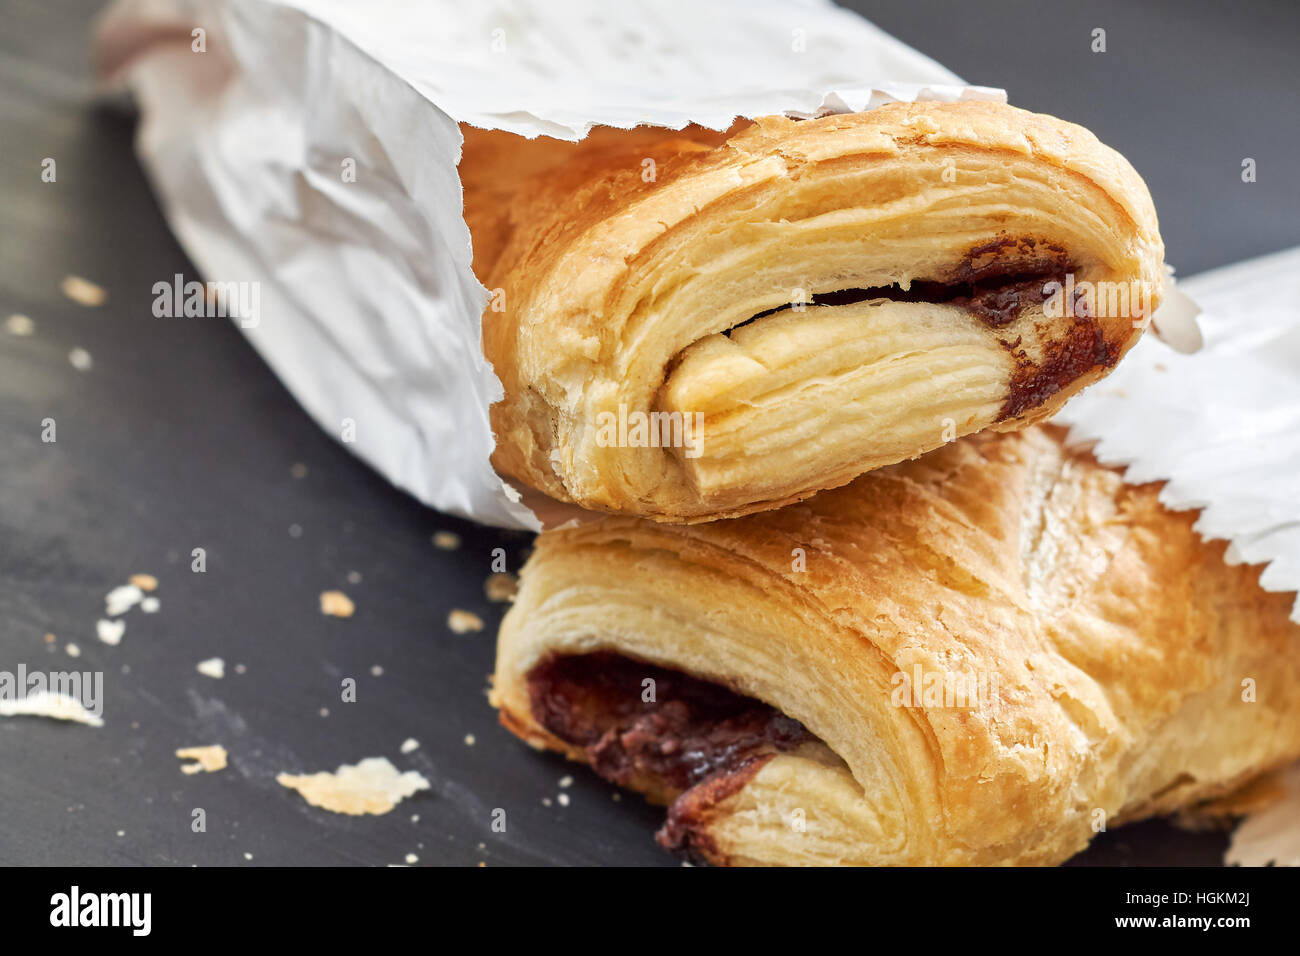 Puff pastry with chocolate filling in white paper bag on black wooden background Stock Photo